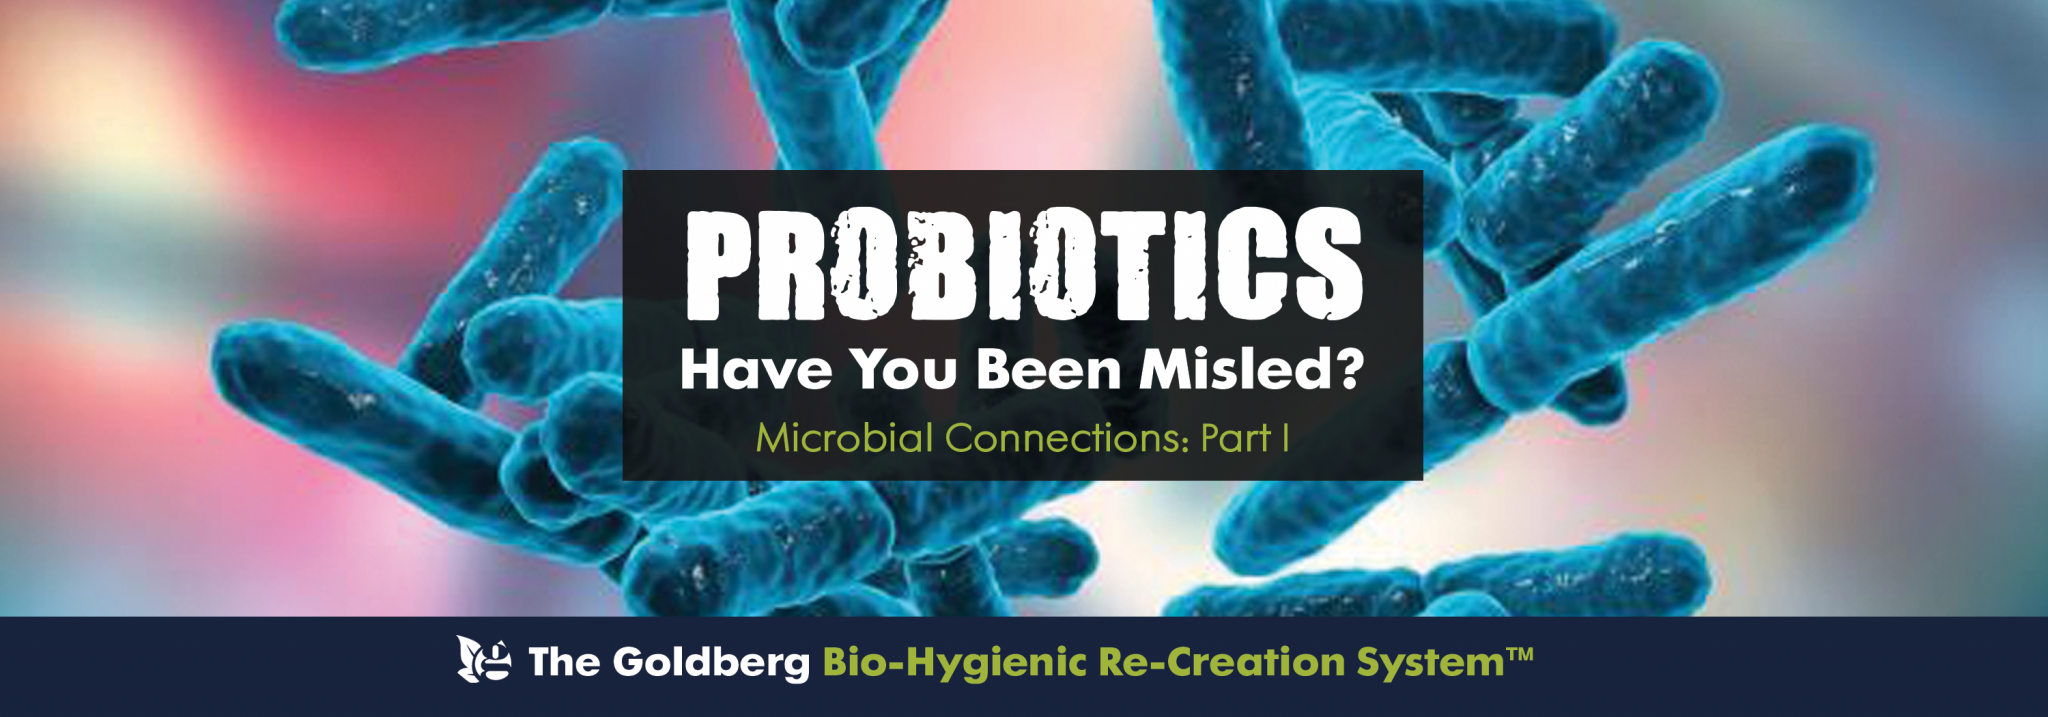 Probiotics: Have you Been Misled?